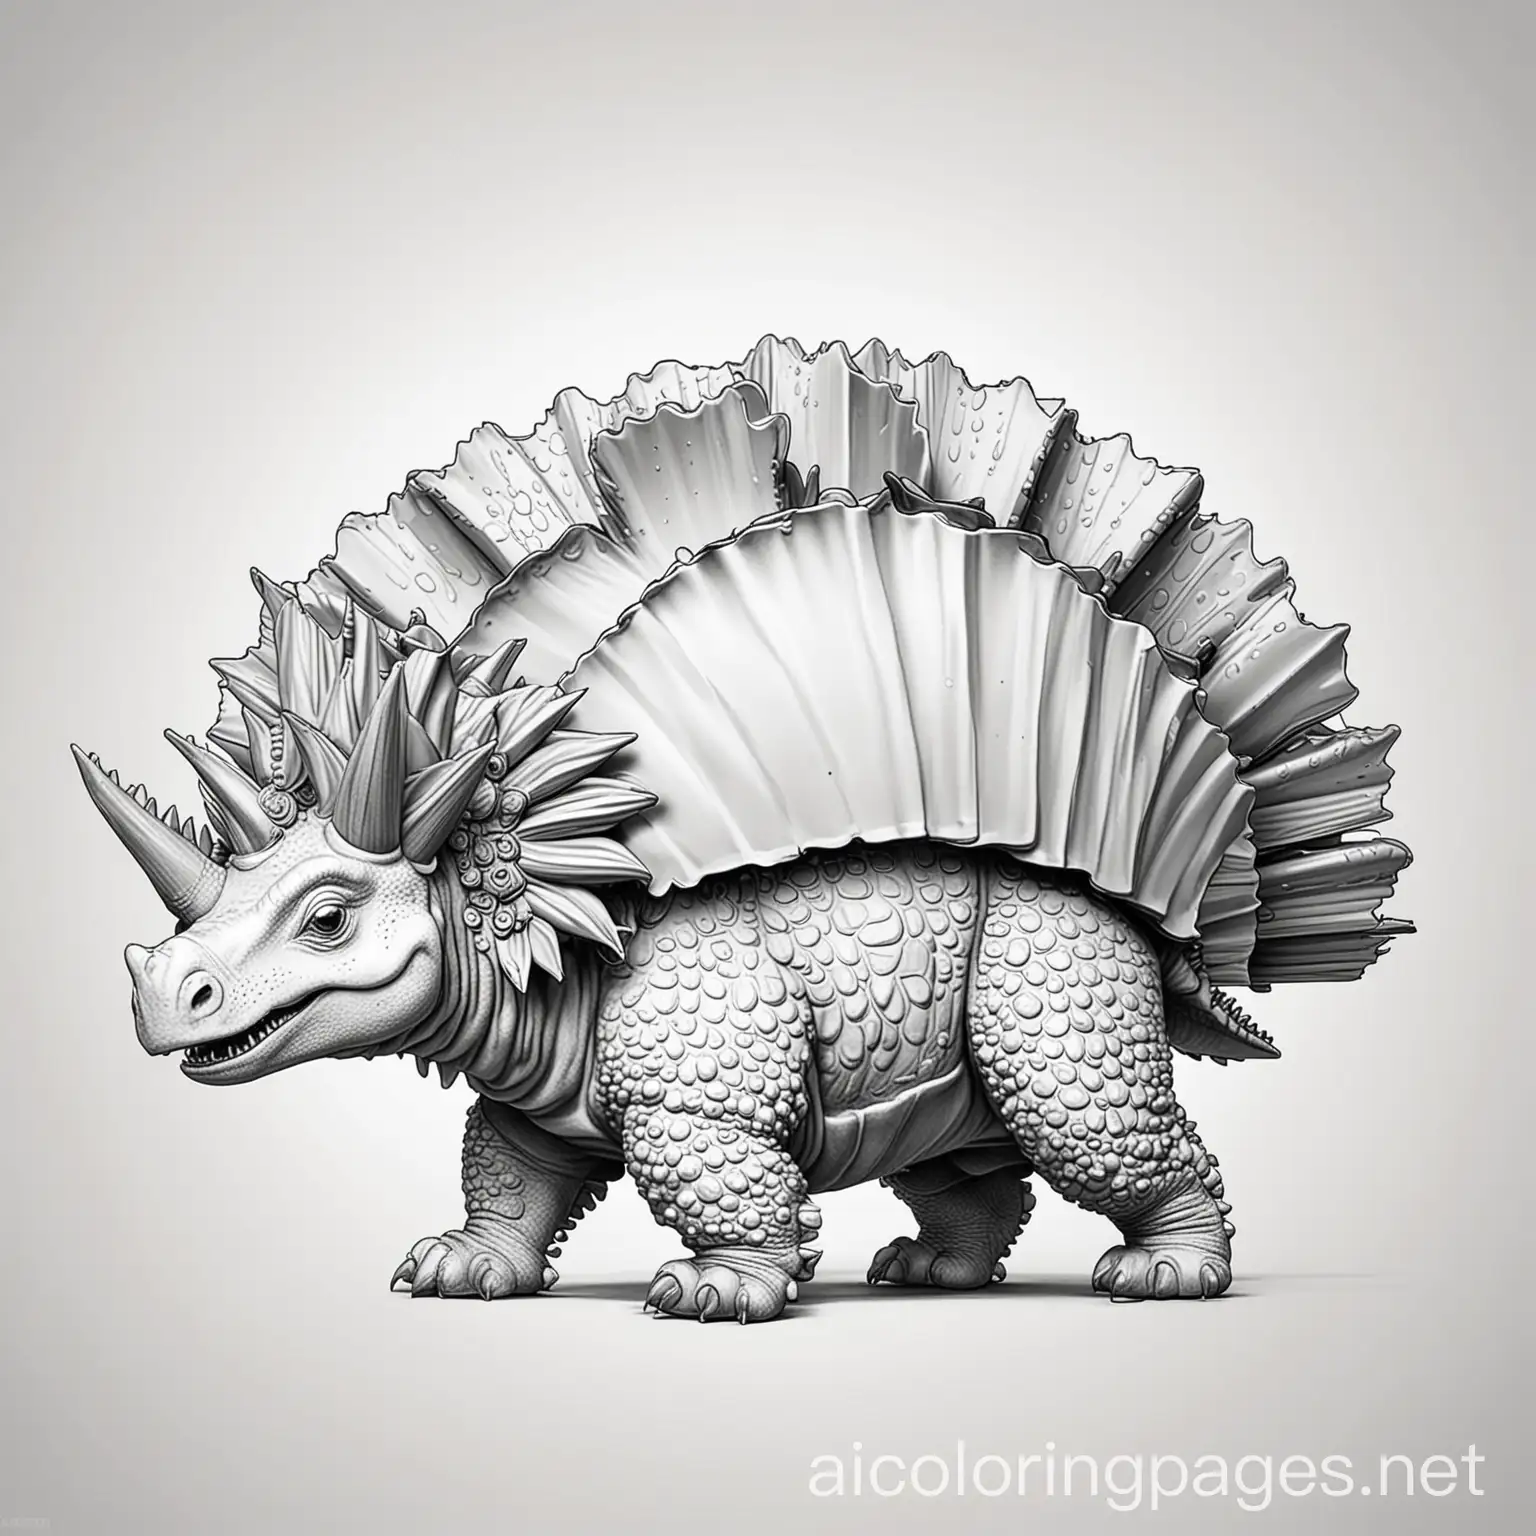 Playful Stegosaurus with plates on its back, Coloring Page, black and white, line art, white background, Simplicity, Ample White Space